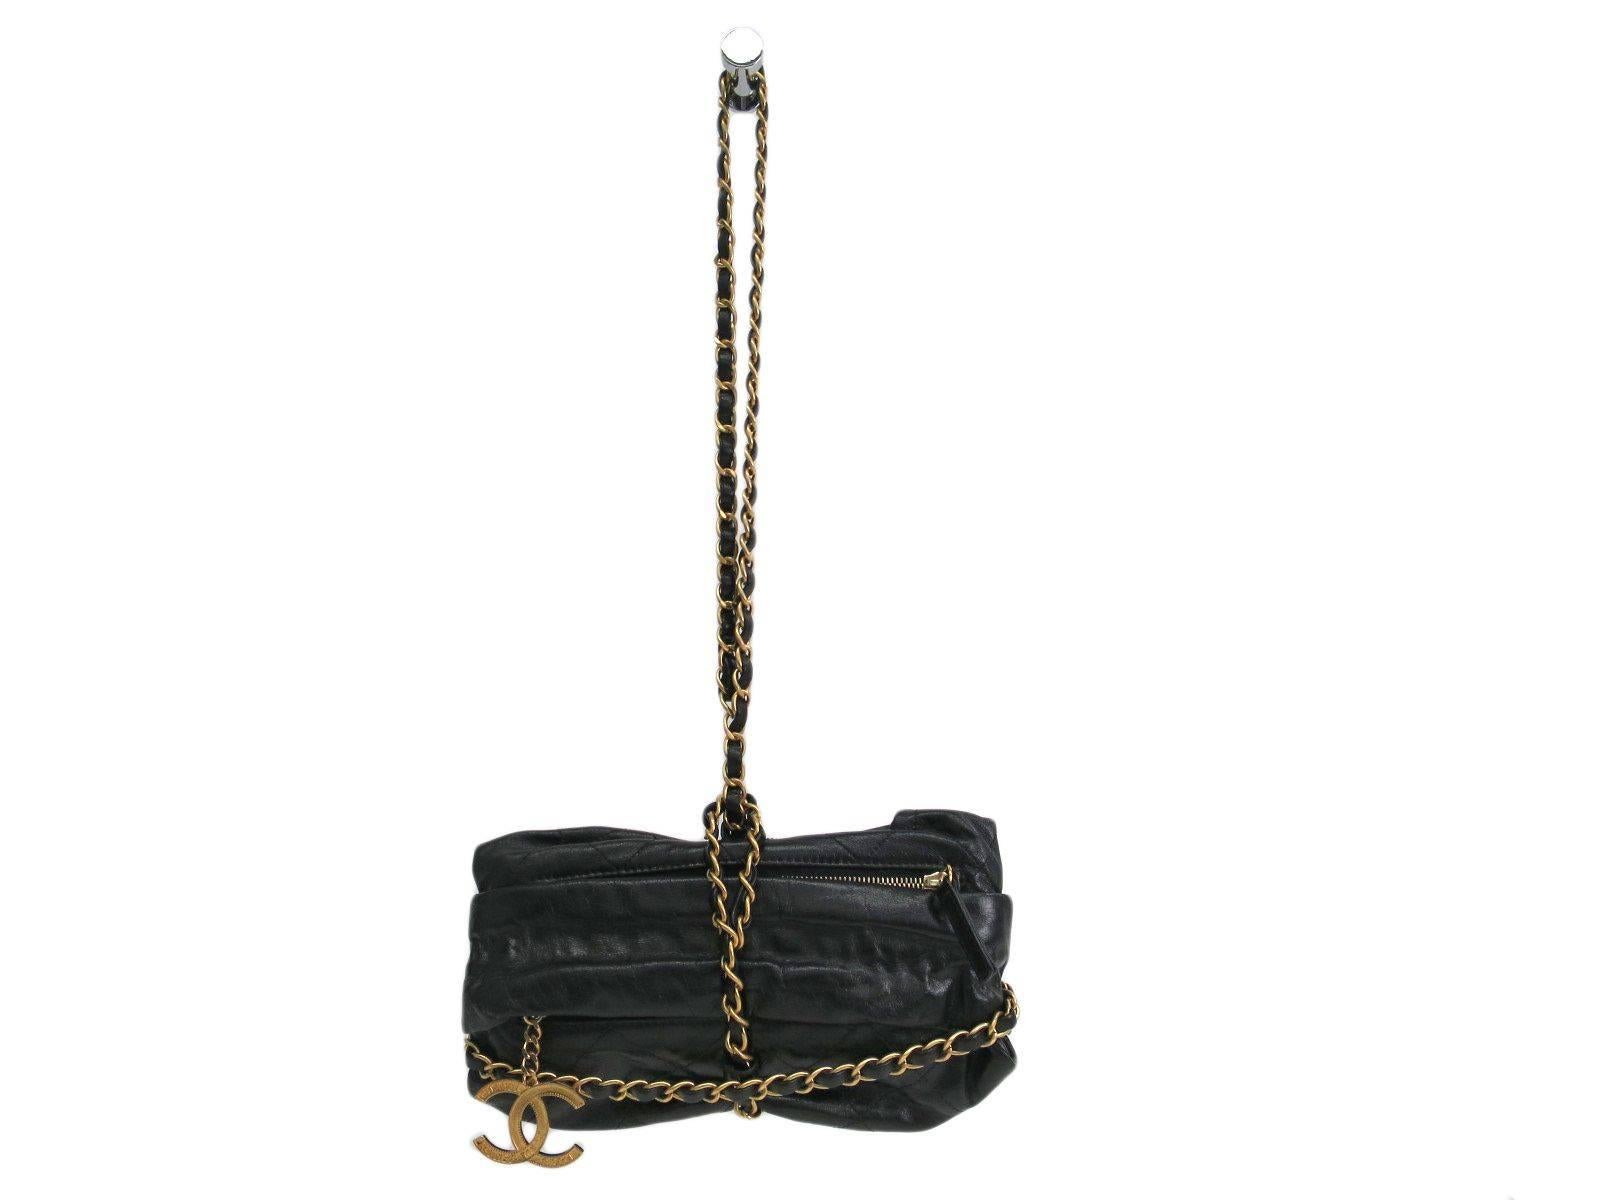 CURATOR'S NOTES

Highly sought and hard to find Chanel Baluchon clutch shoulder bag.  Featuring buttery calfskin leather, rich gold CC charm and chain, you will not find this beautiful bag anywhere at this incredible price.

Calfskin